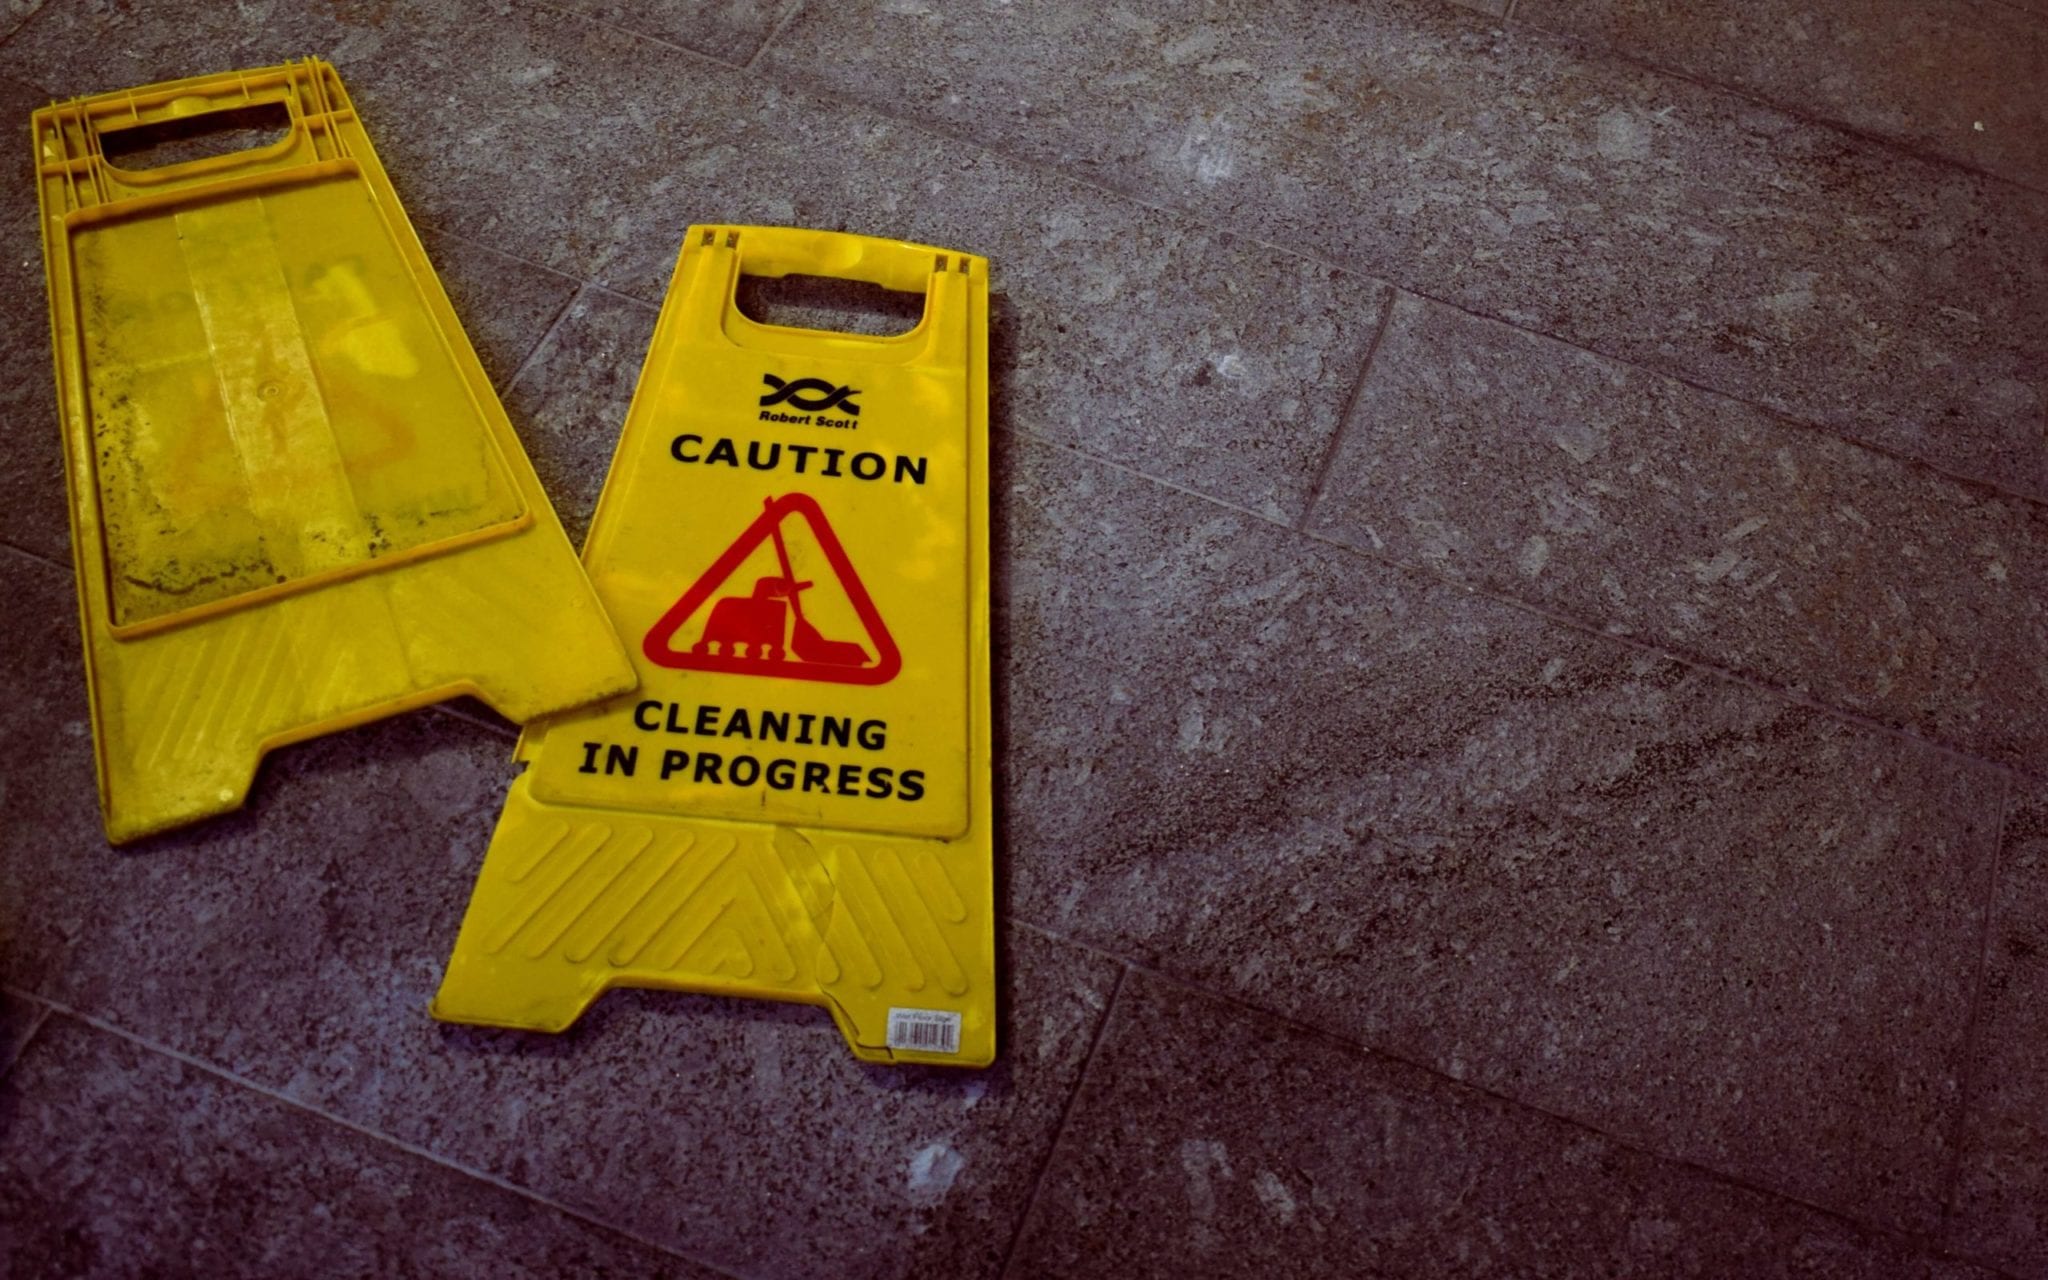 Proving Fault in a Slip and Fall Accident